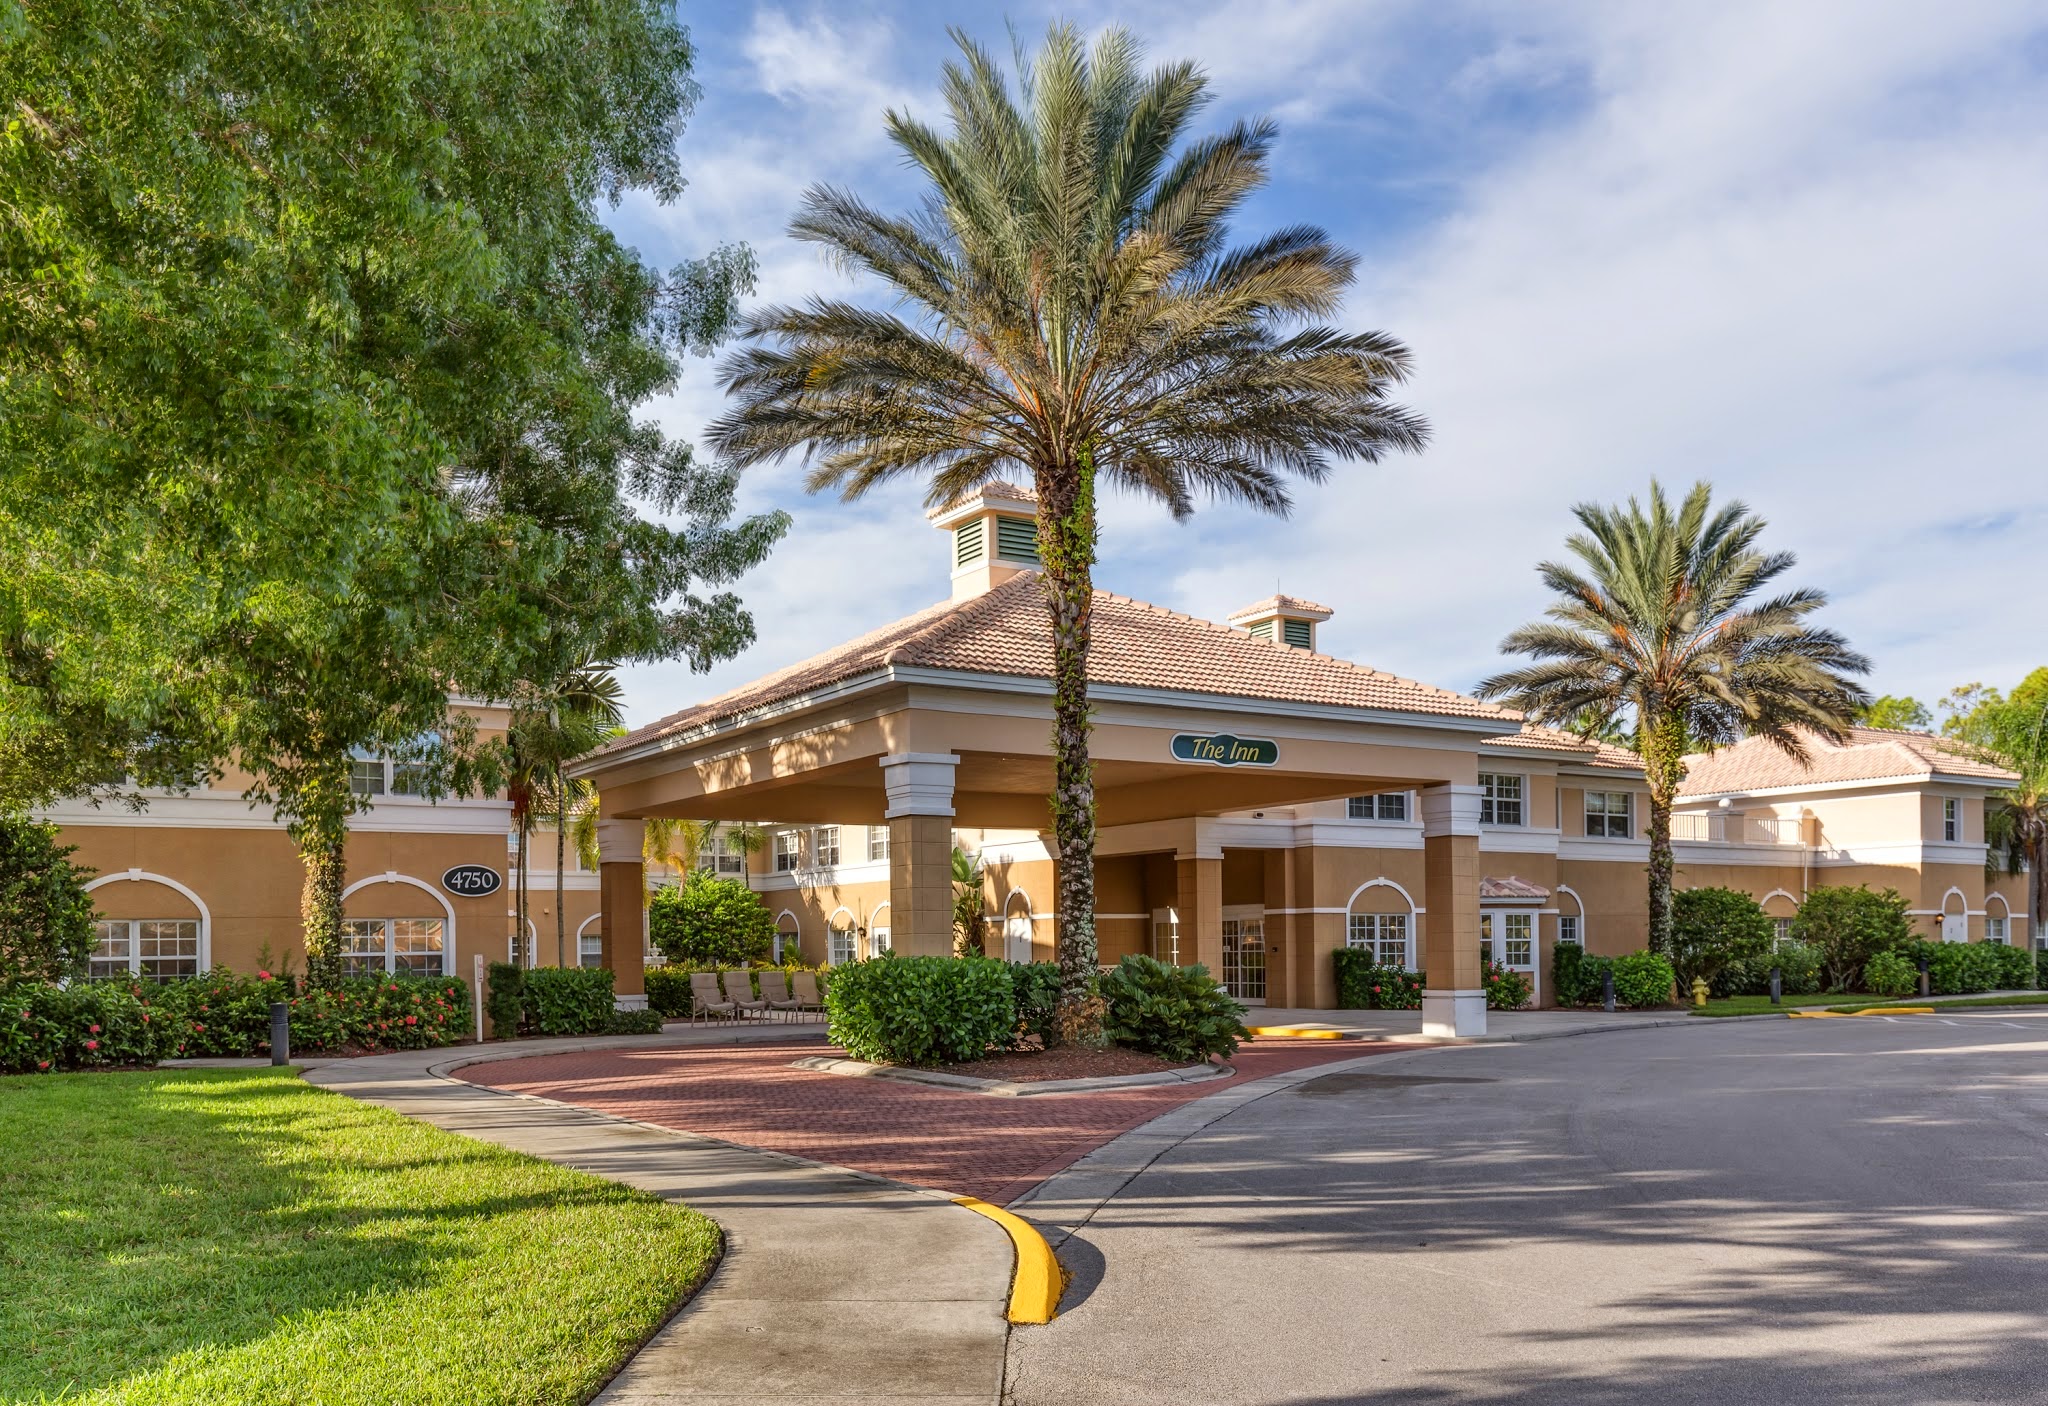 The Best Assisted Living Facilities in Naples, FL